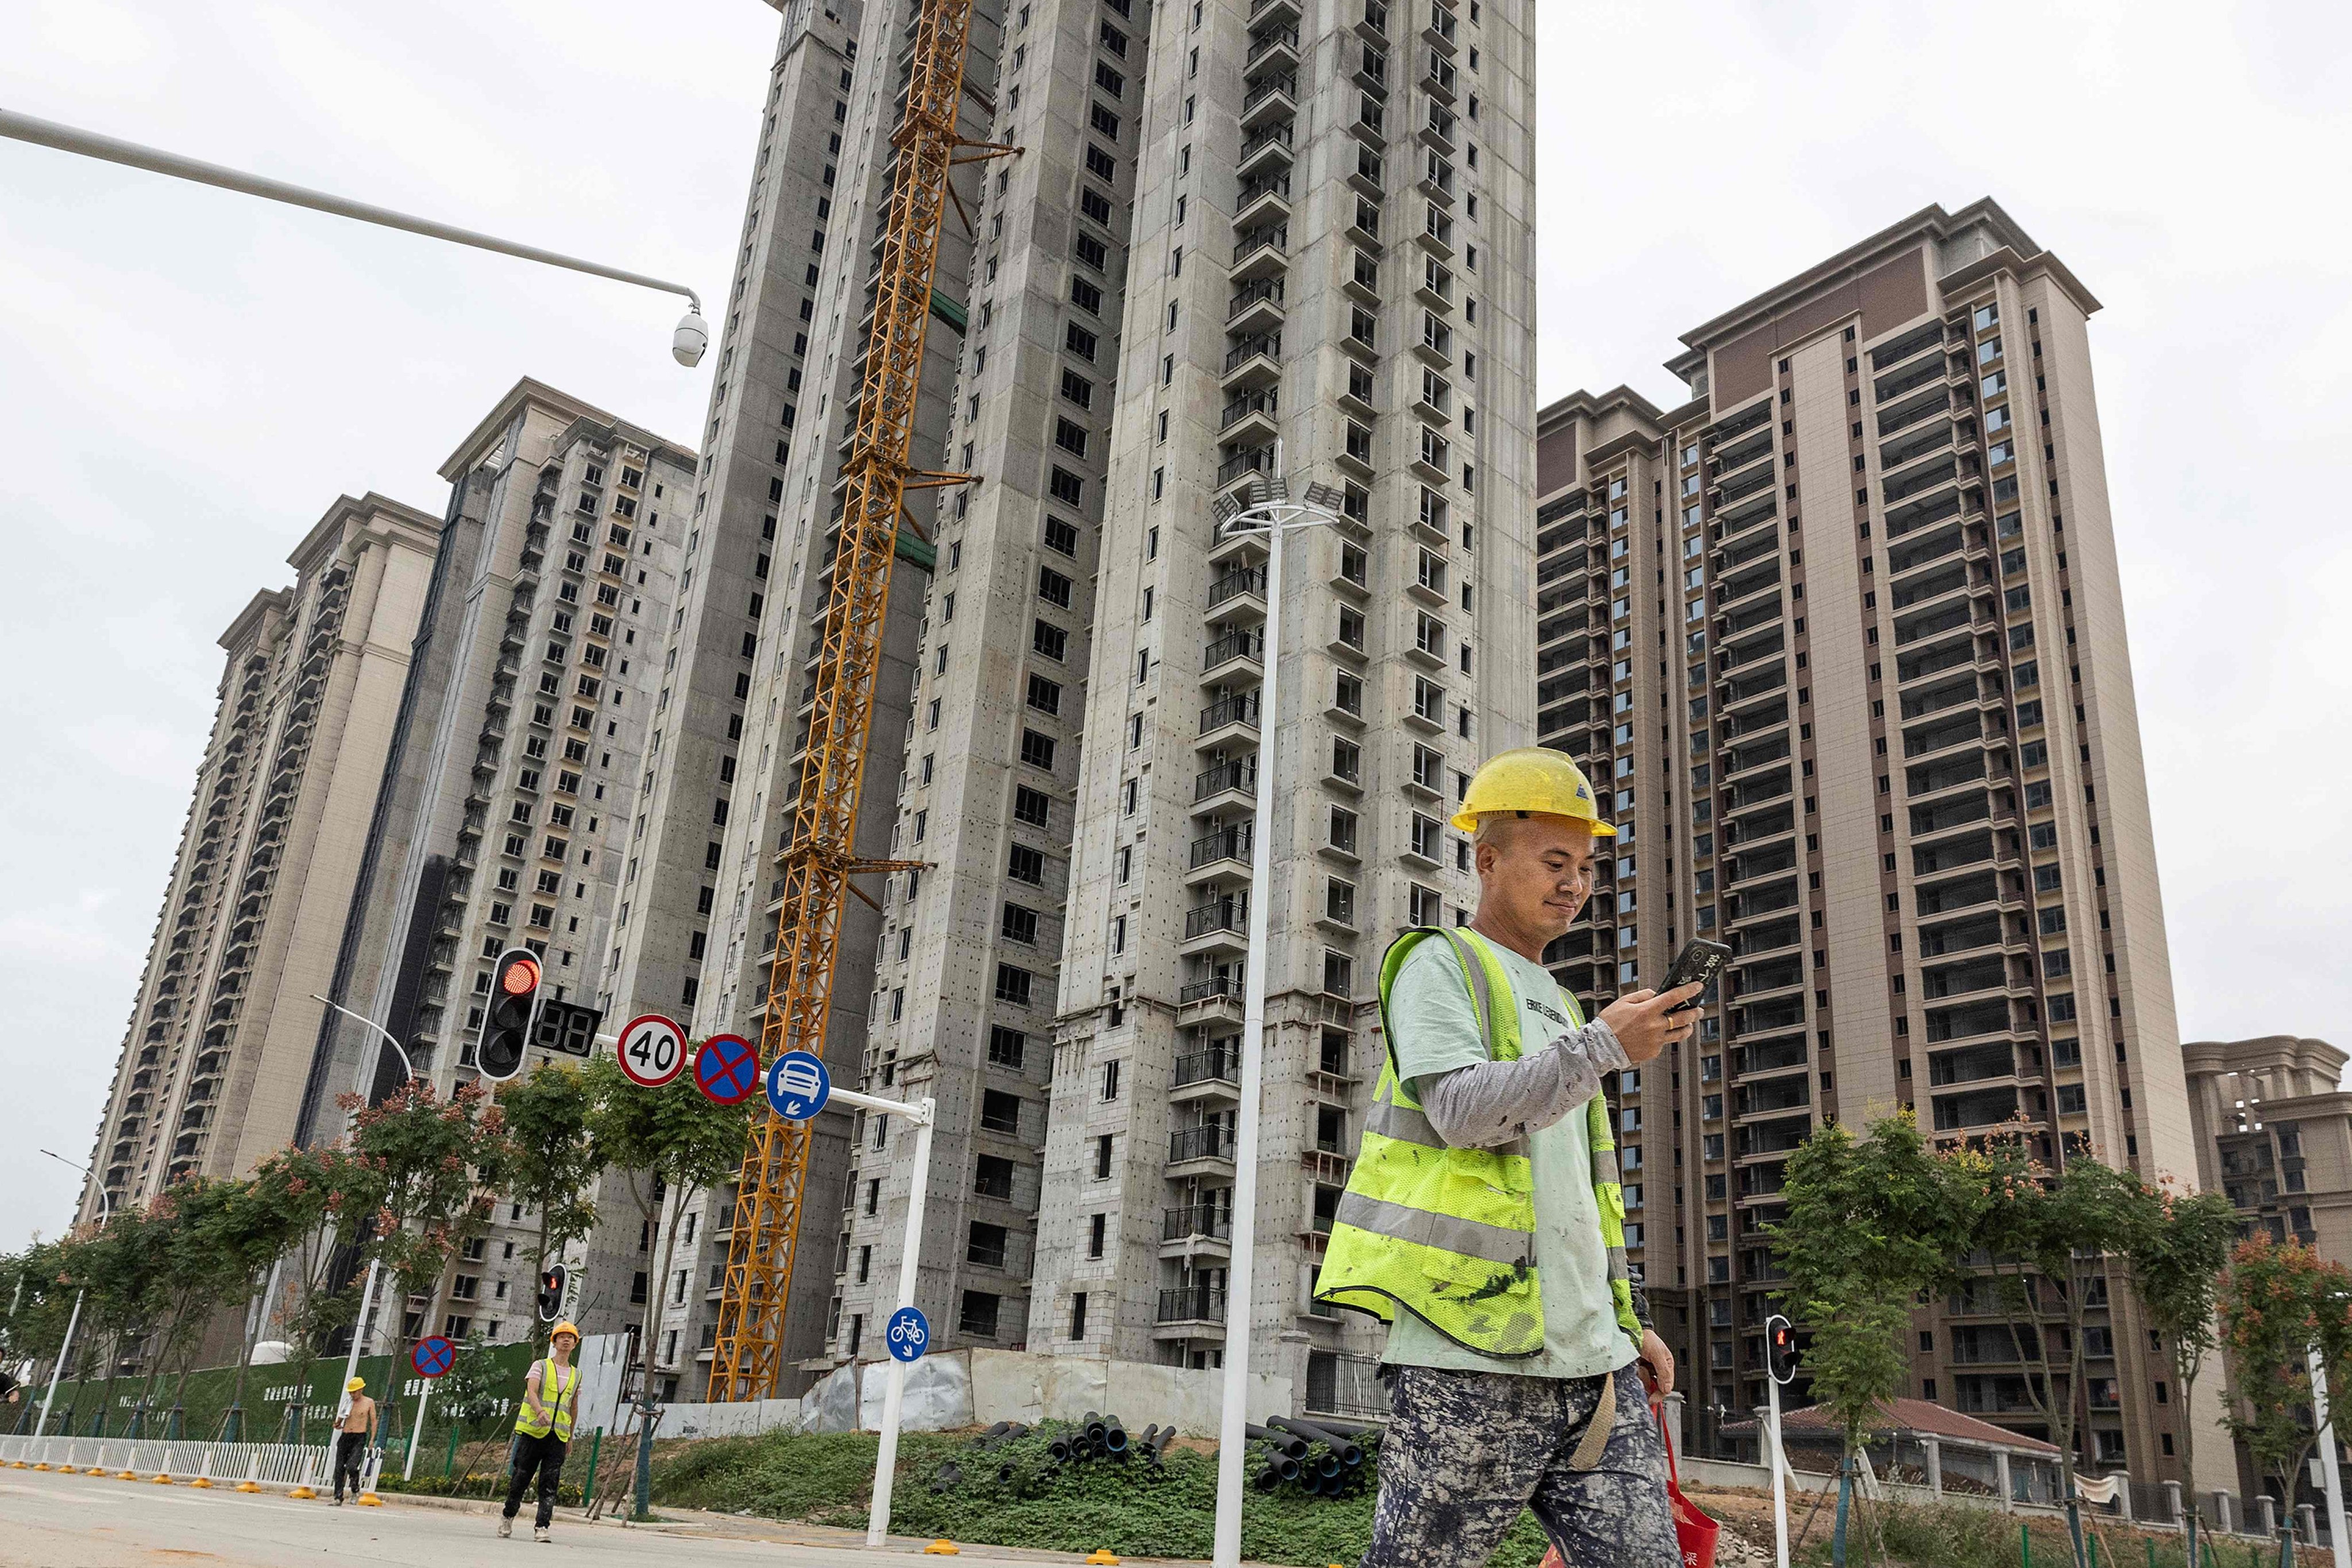 Local-level authorities in China’s Hubei province have been called out for adding to the nation’s “hidden debt”. Photo: AFP